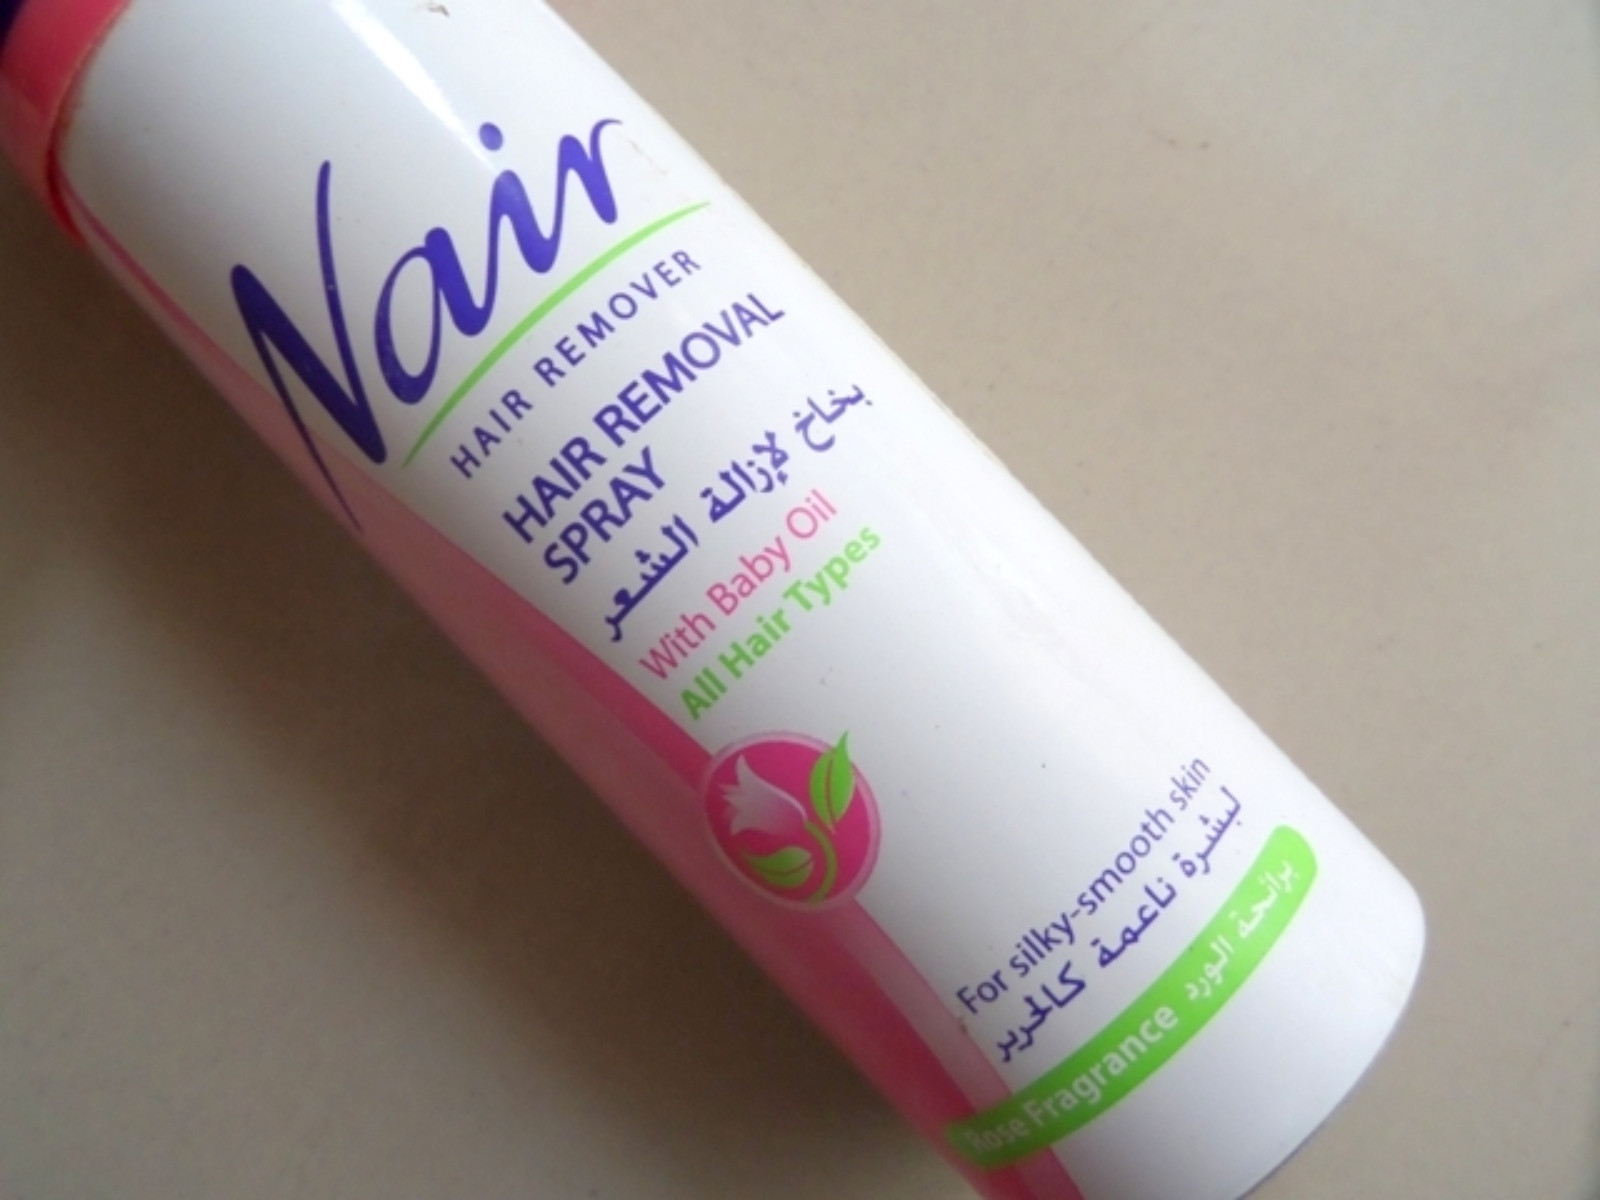 Baby Oil For Hair
 Nair Rose Hair Removal Spray with Baby Oil Review